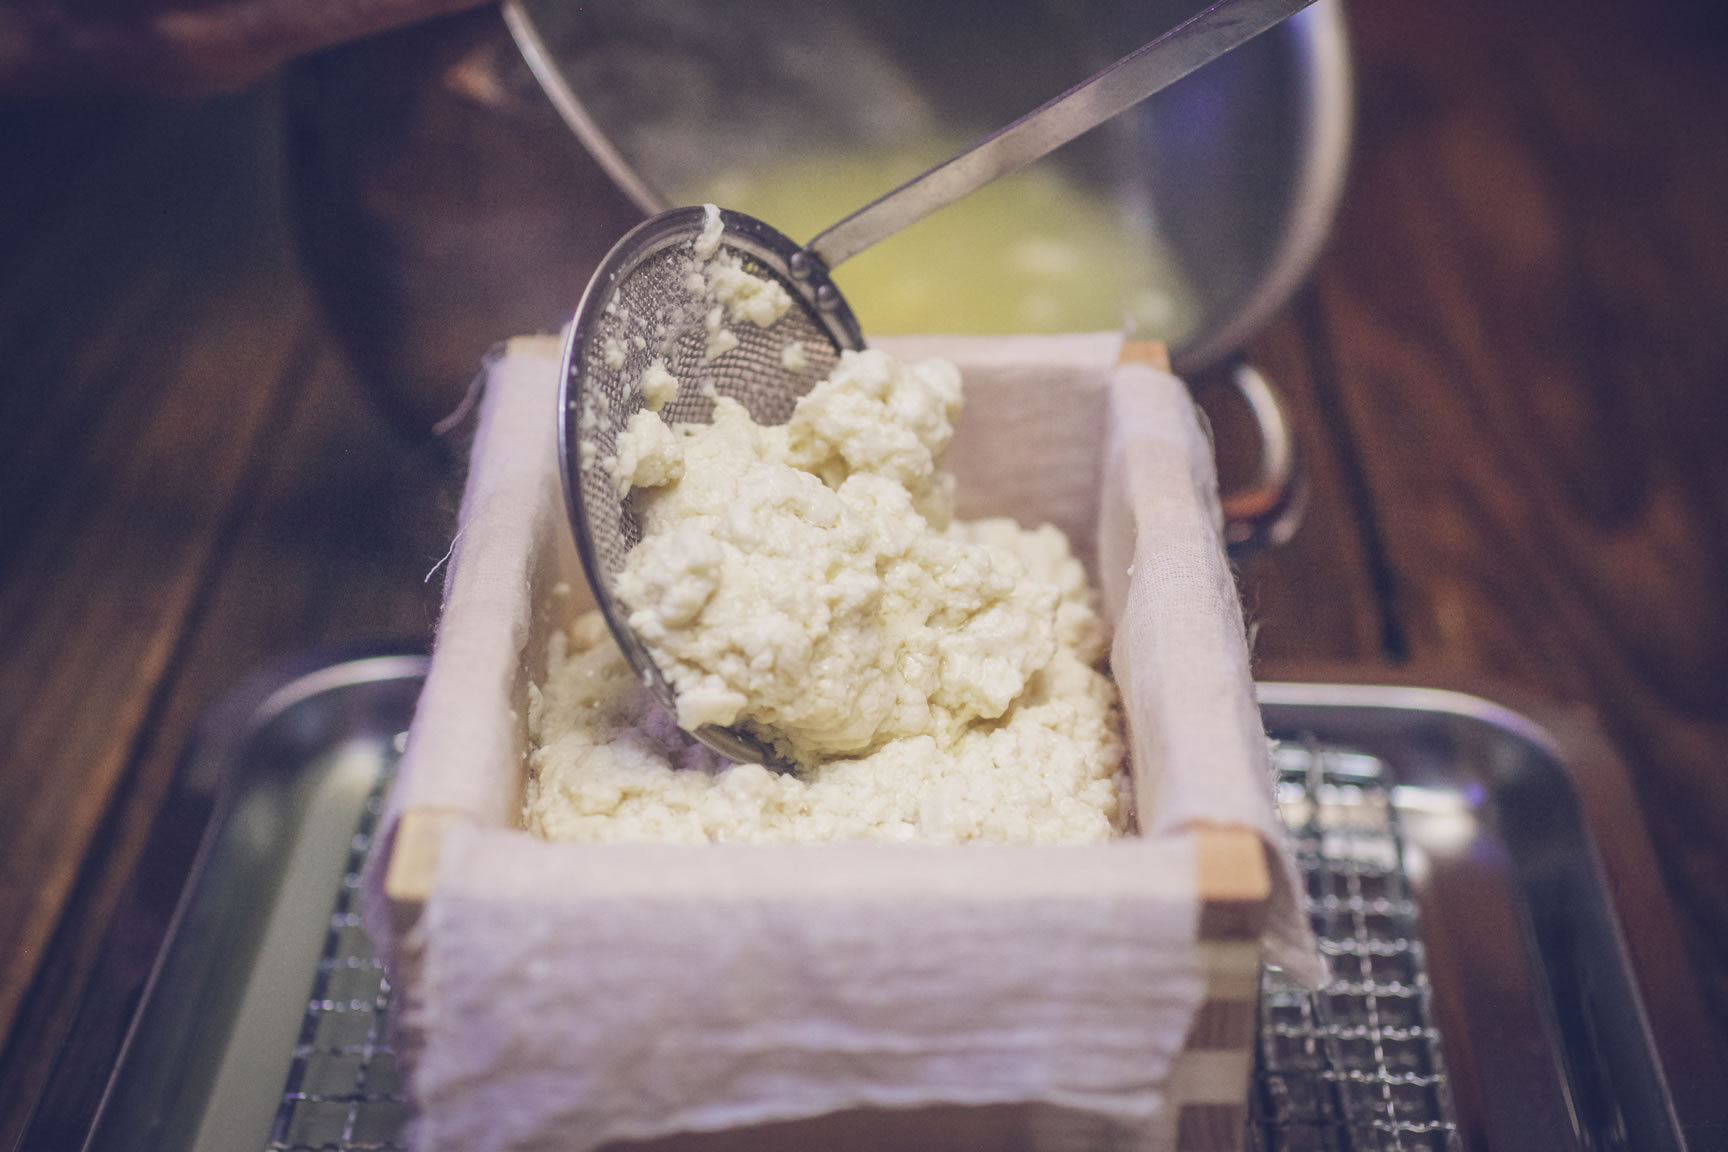 ladle curds into mold